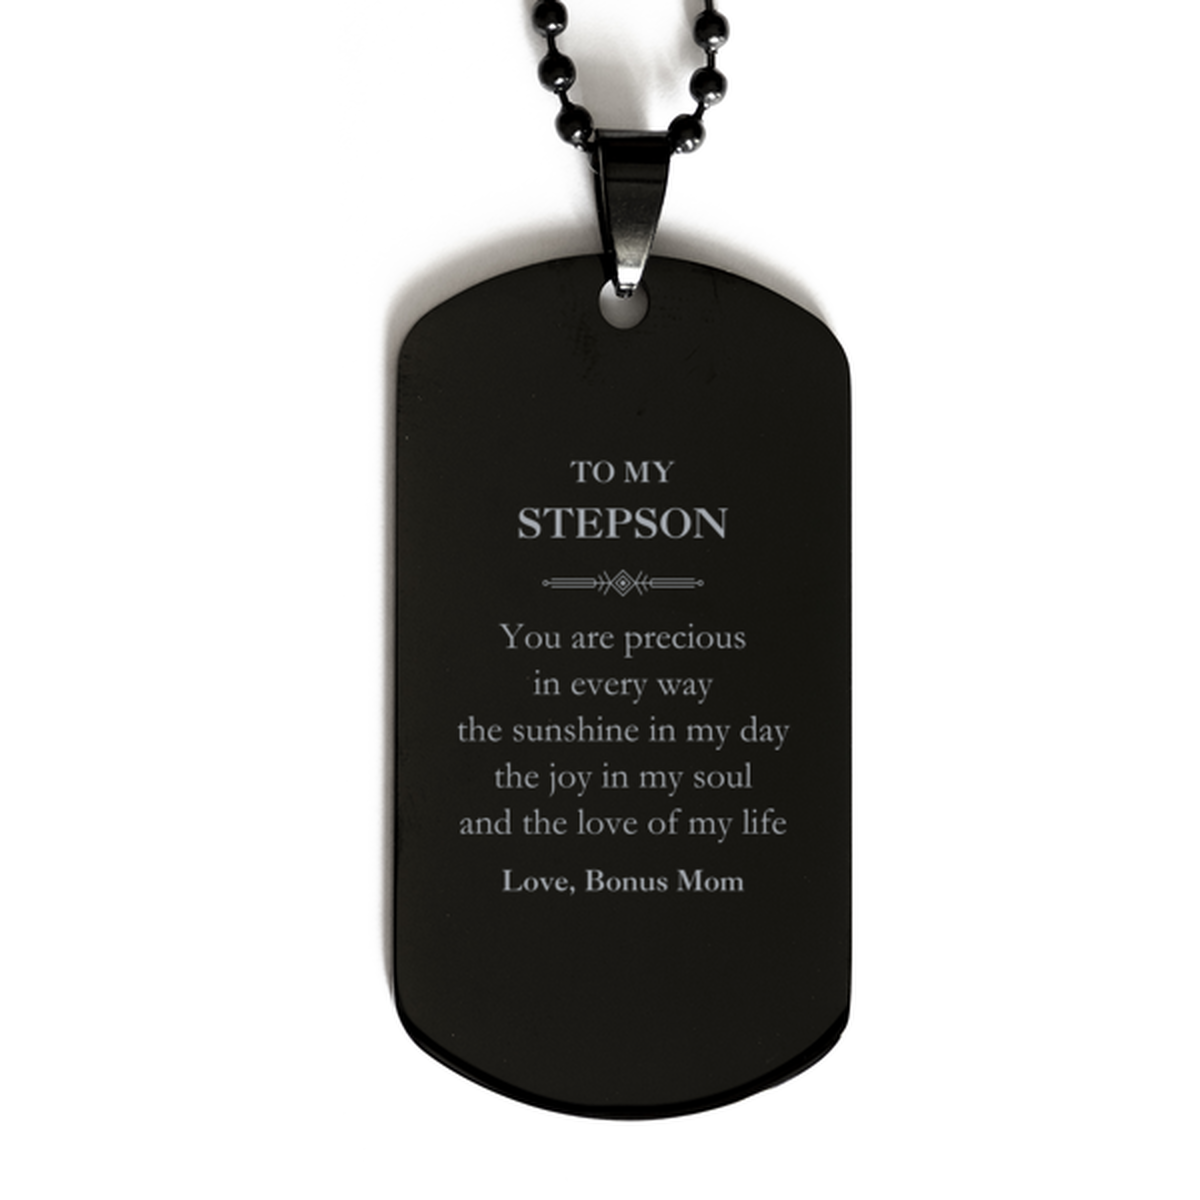 Graduation Gifts for Stepson Black Dog Tag Present from Bonus Mom, Christmas Stepson Birthday Gifts Stepson You are precious in every way the sunshine in my day. Love, Bonus Mom